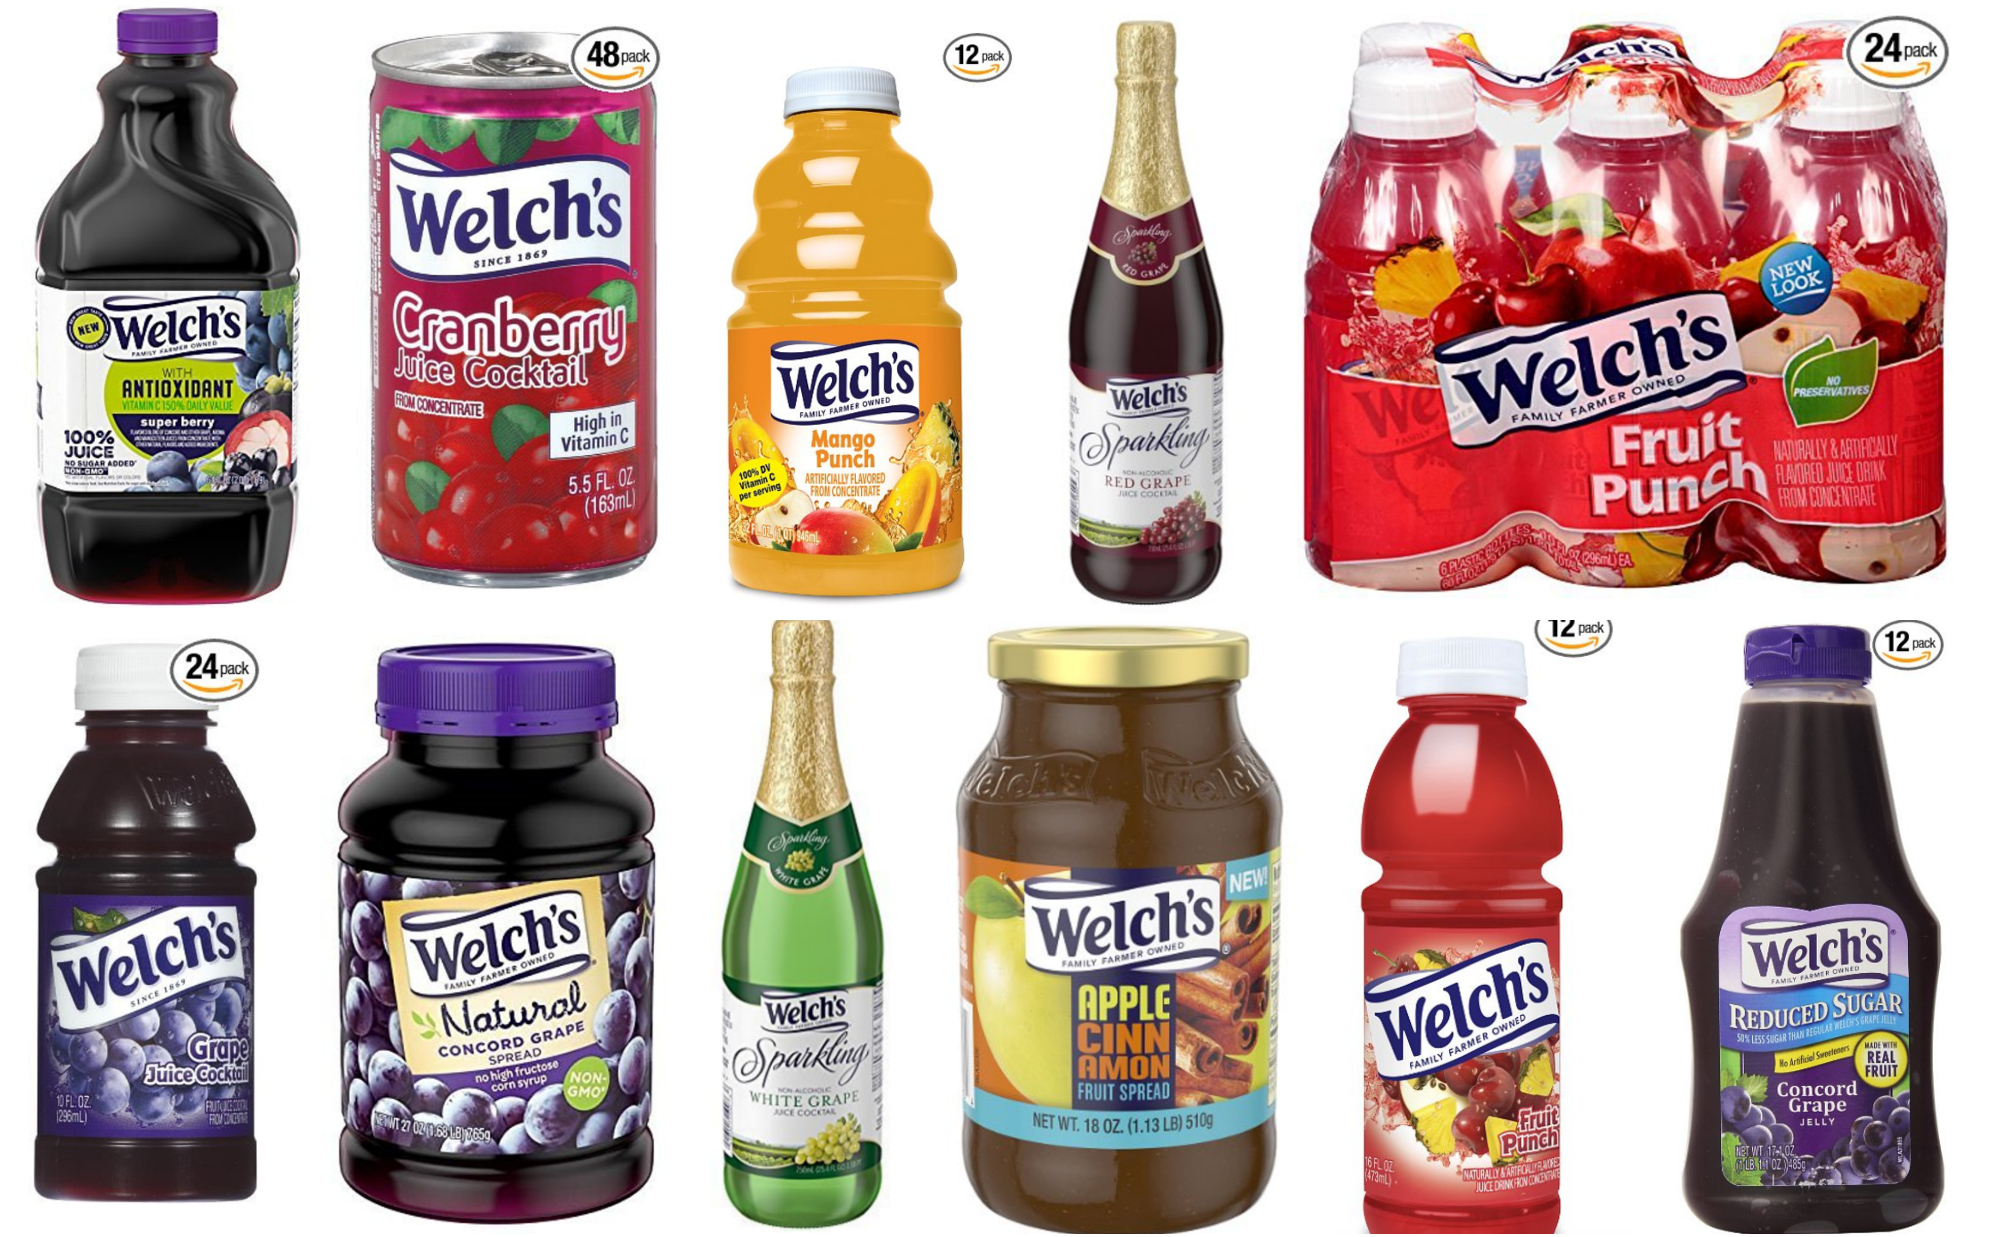 NEW Coupons = Lots of Extra Discounts on Select Welch's Juice!